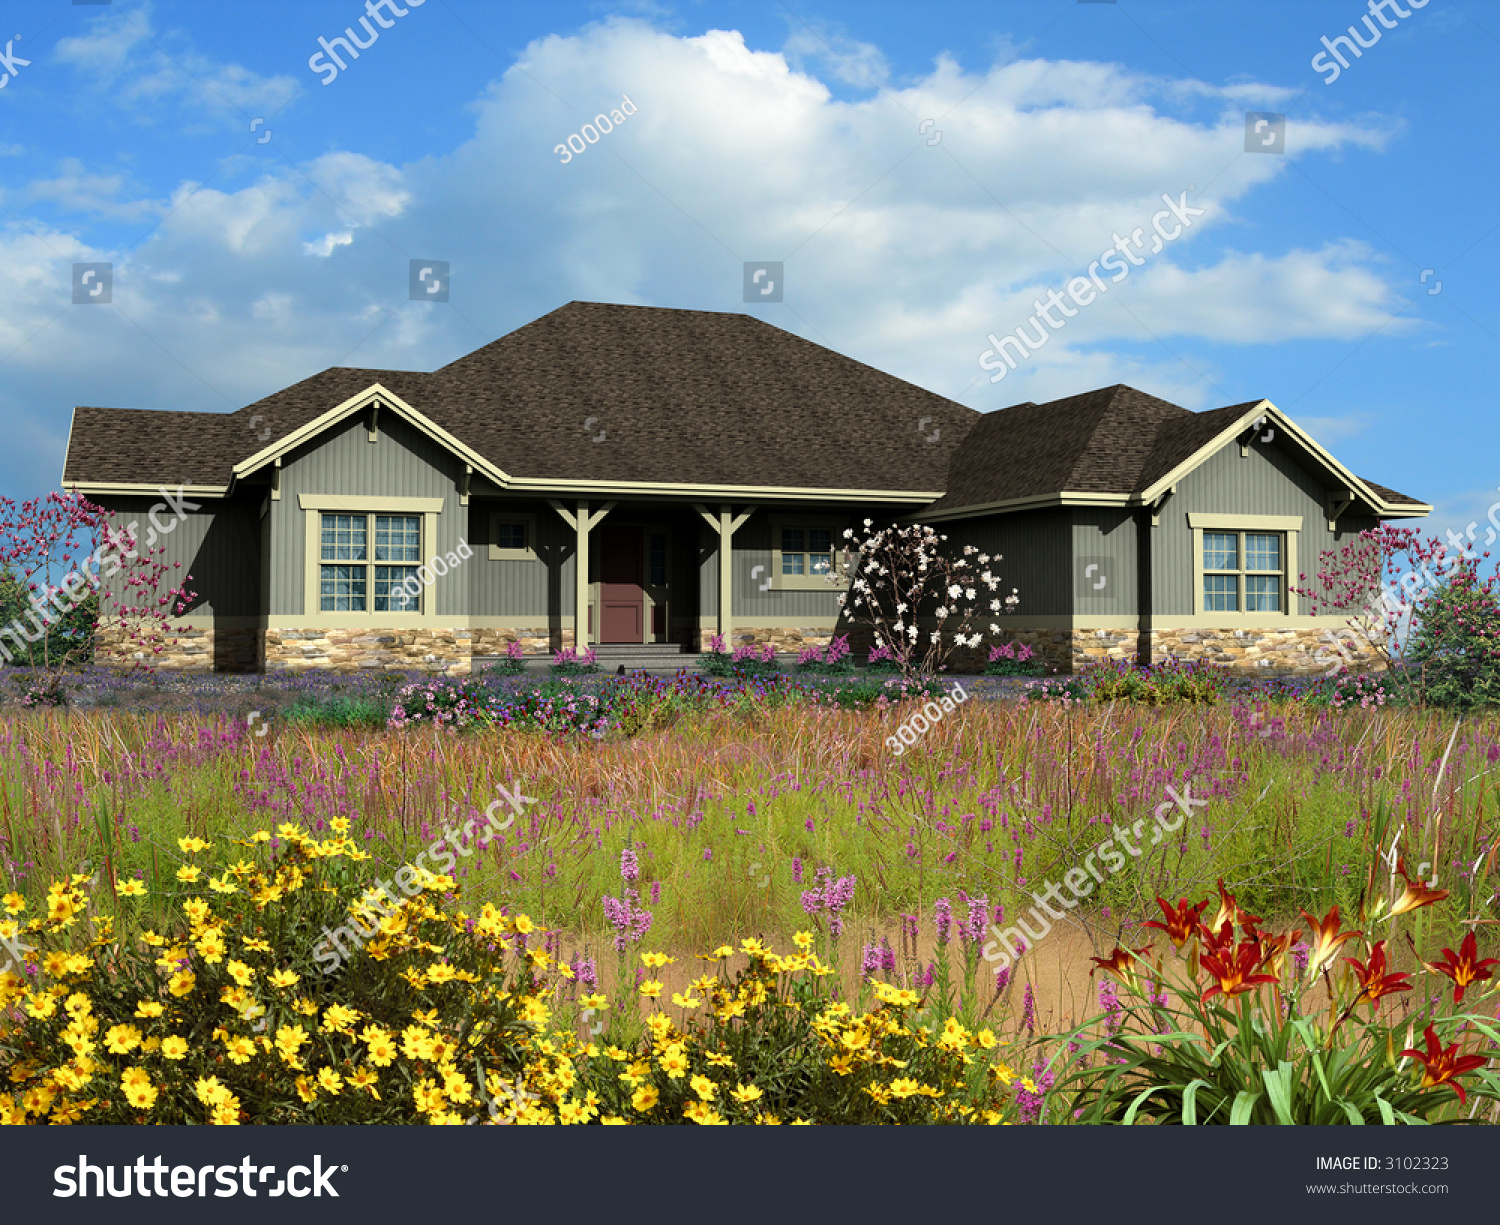 ranch house clipart - photo #45